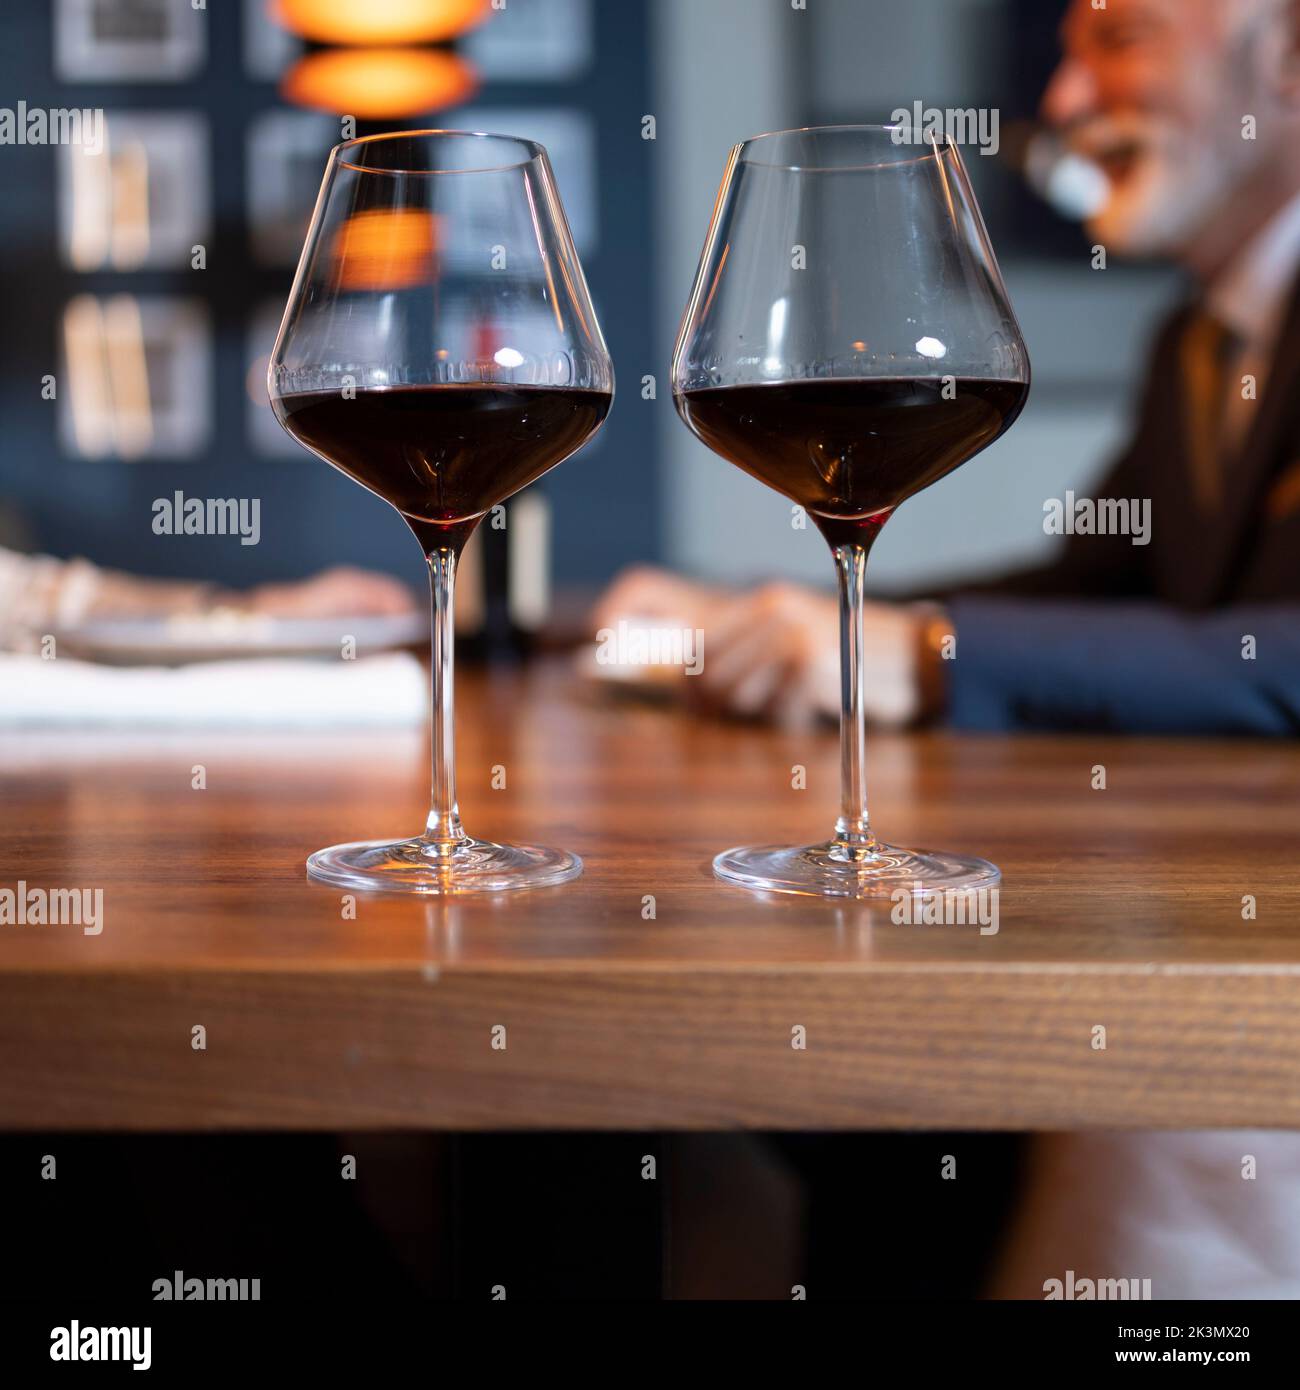 Two glasses of wine on the table Stock Photo